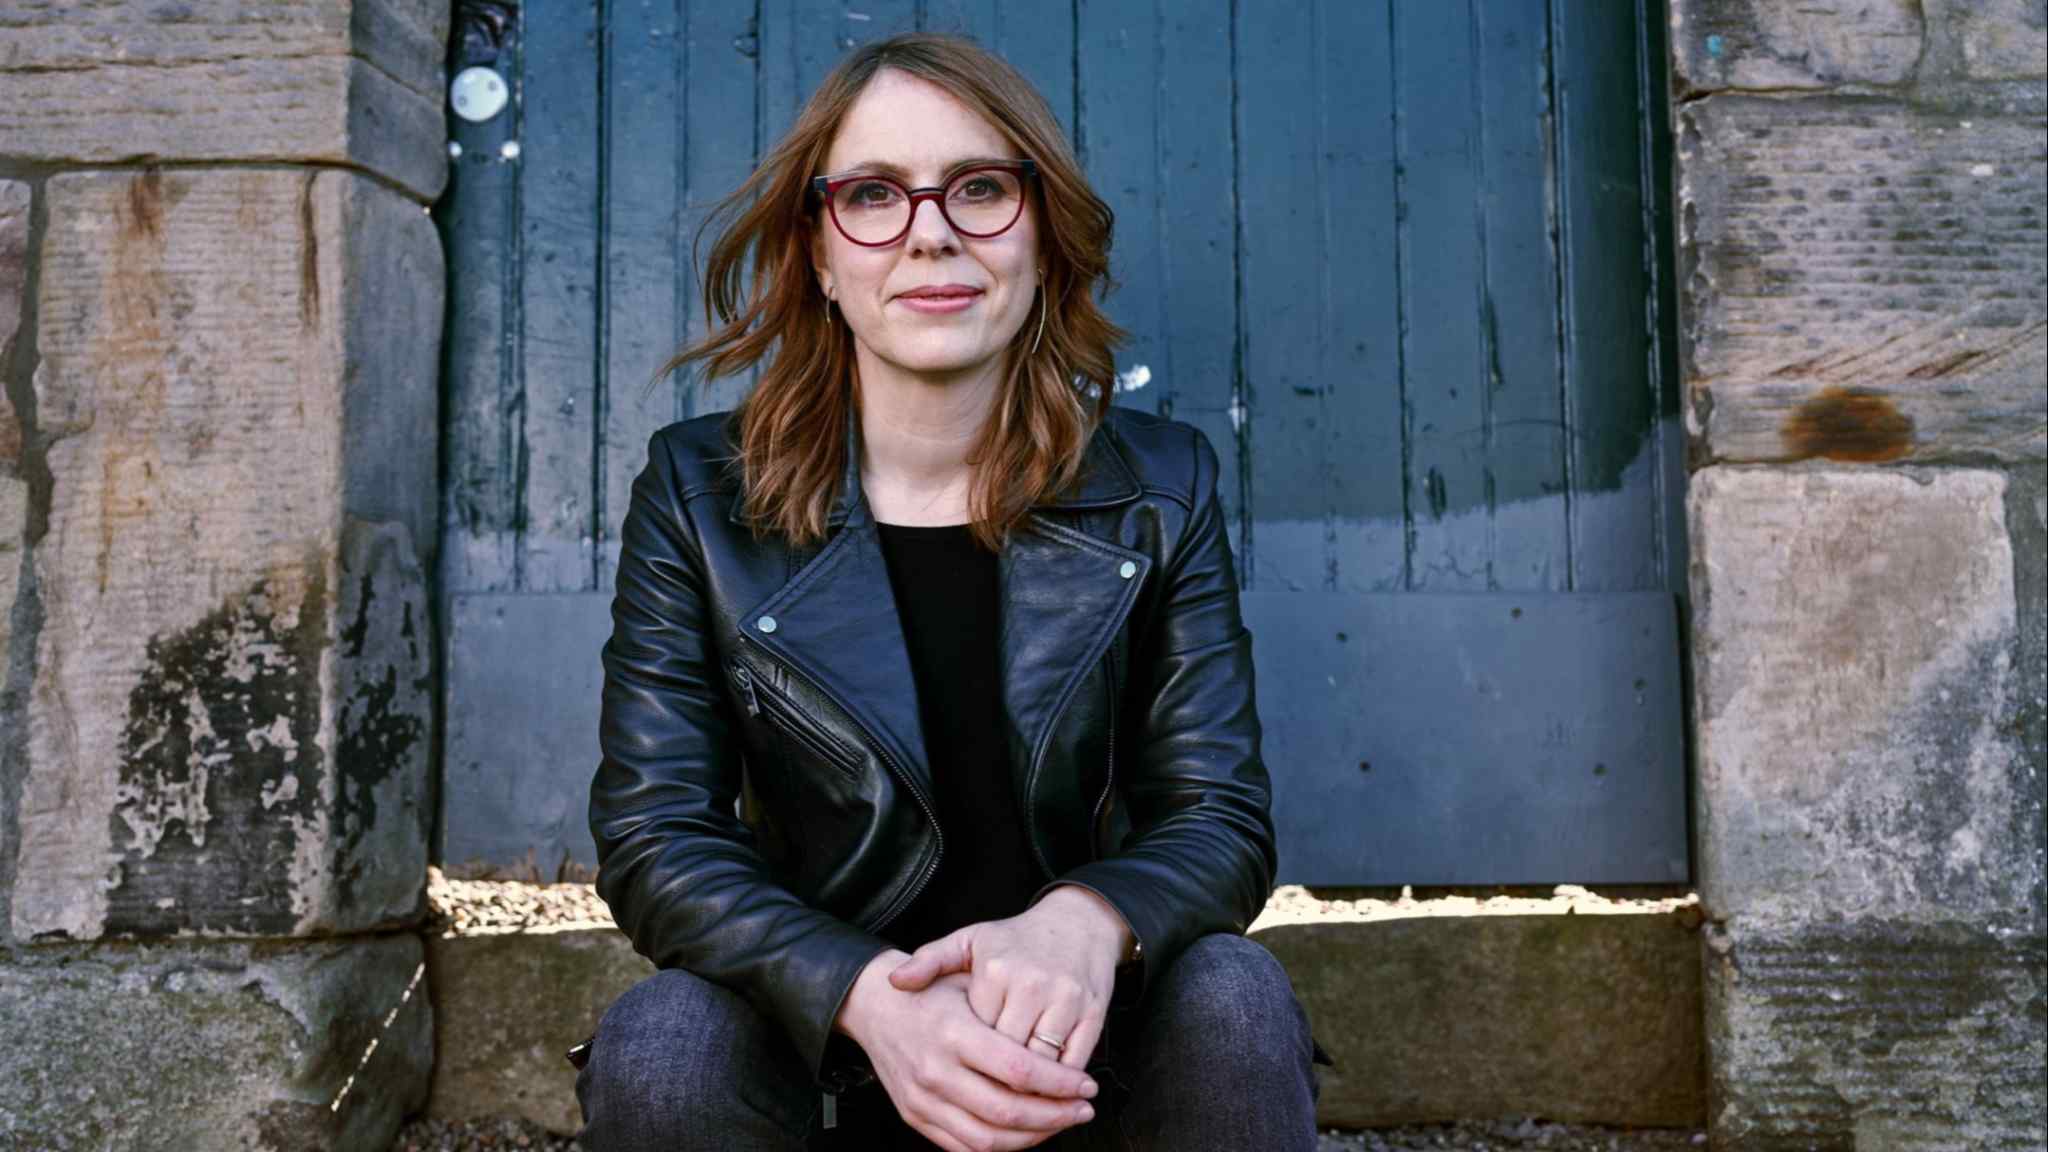 Composer Anna Clyne: ‘Music with melody connects with something very deeply rooted in us’